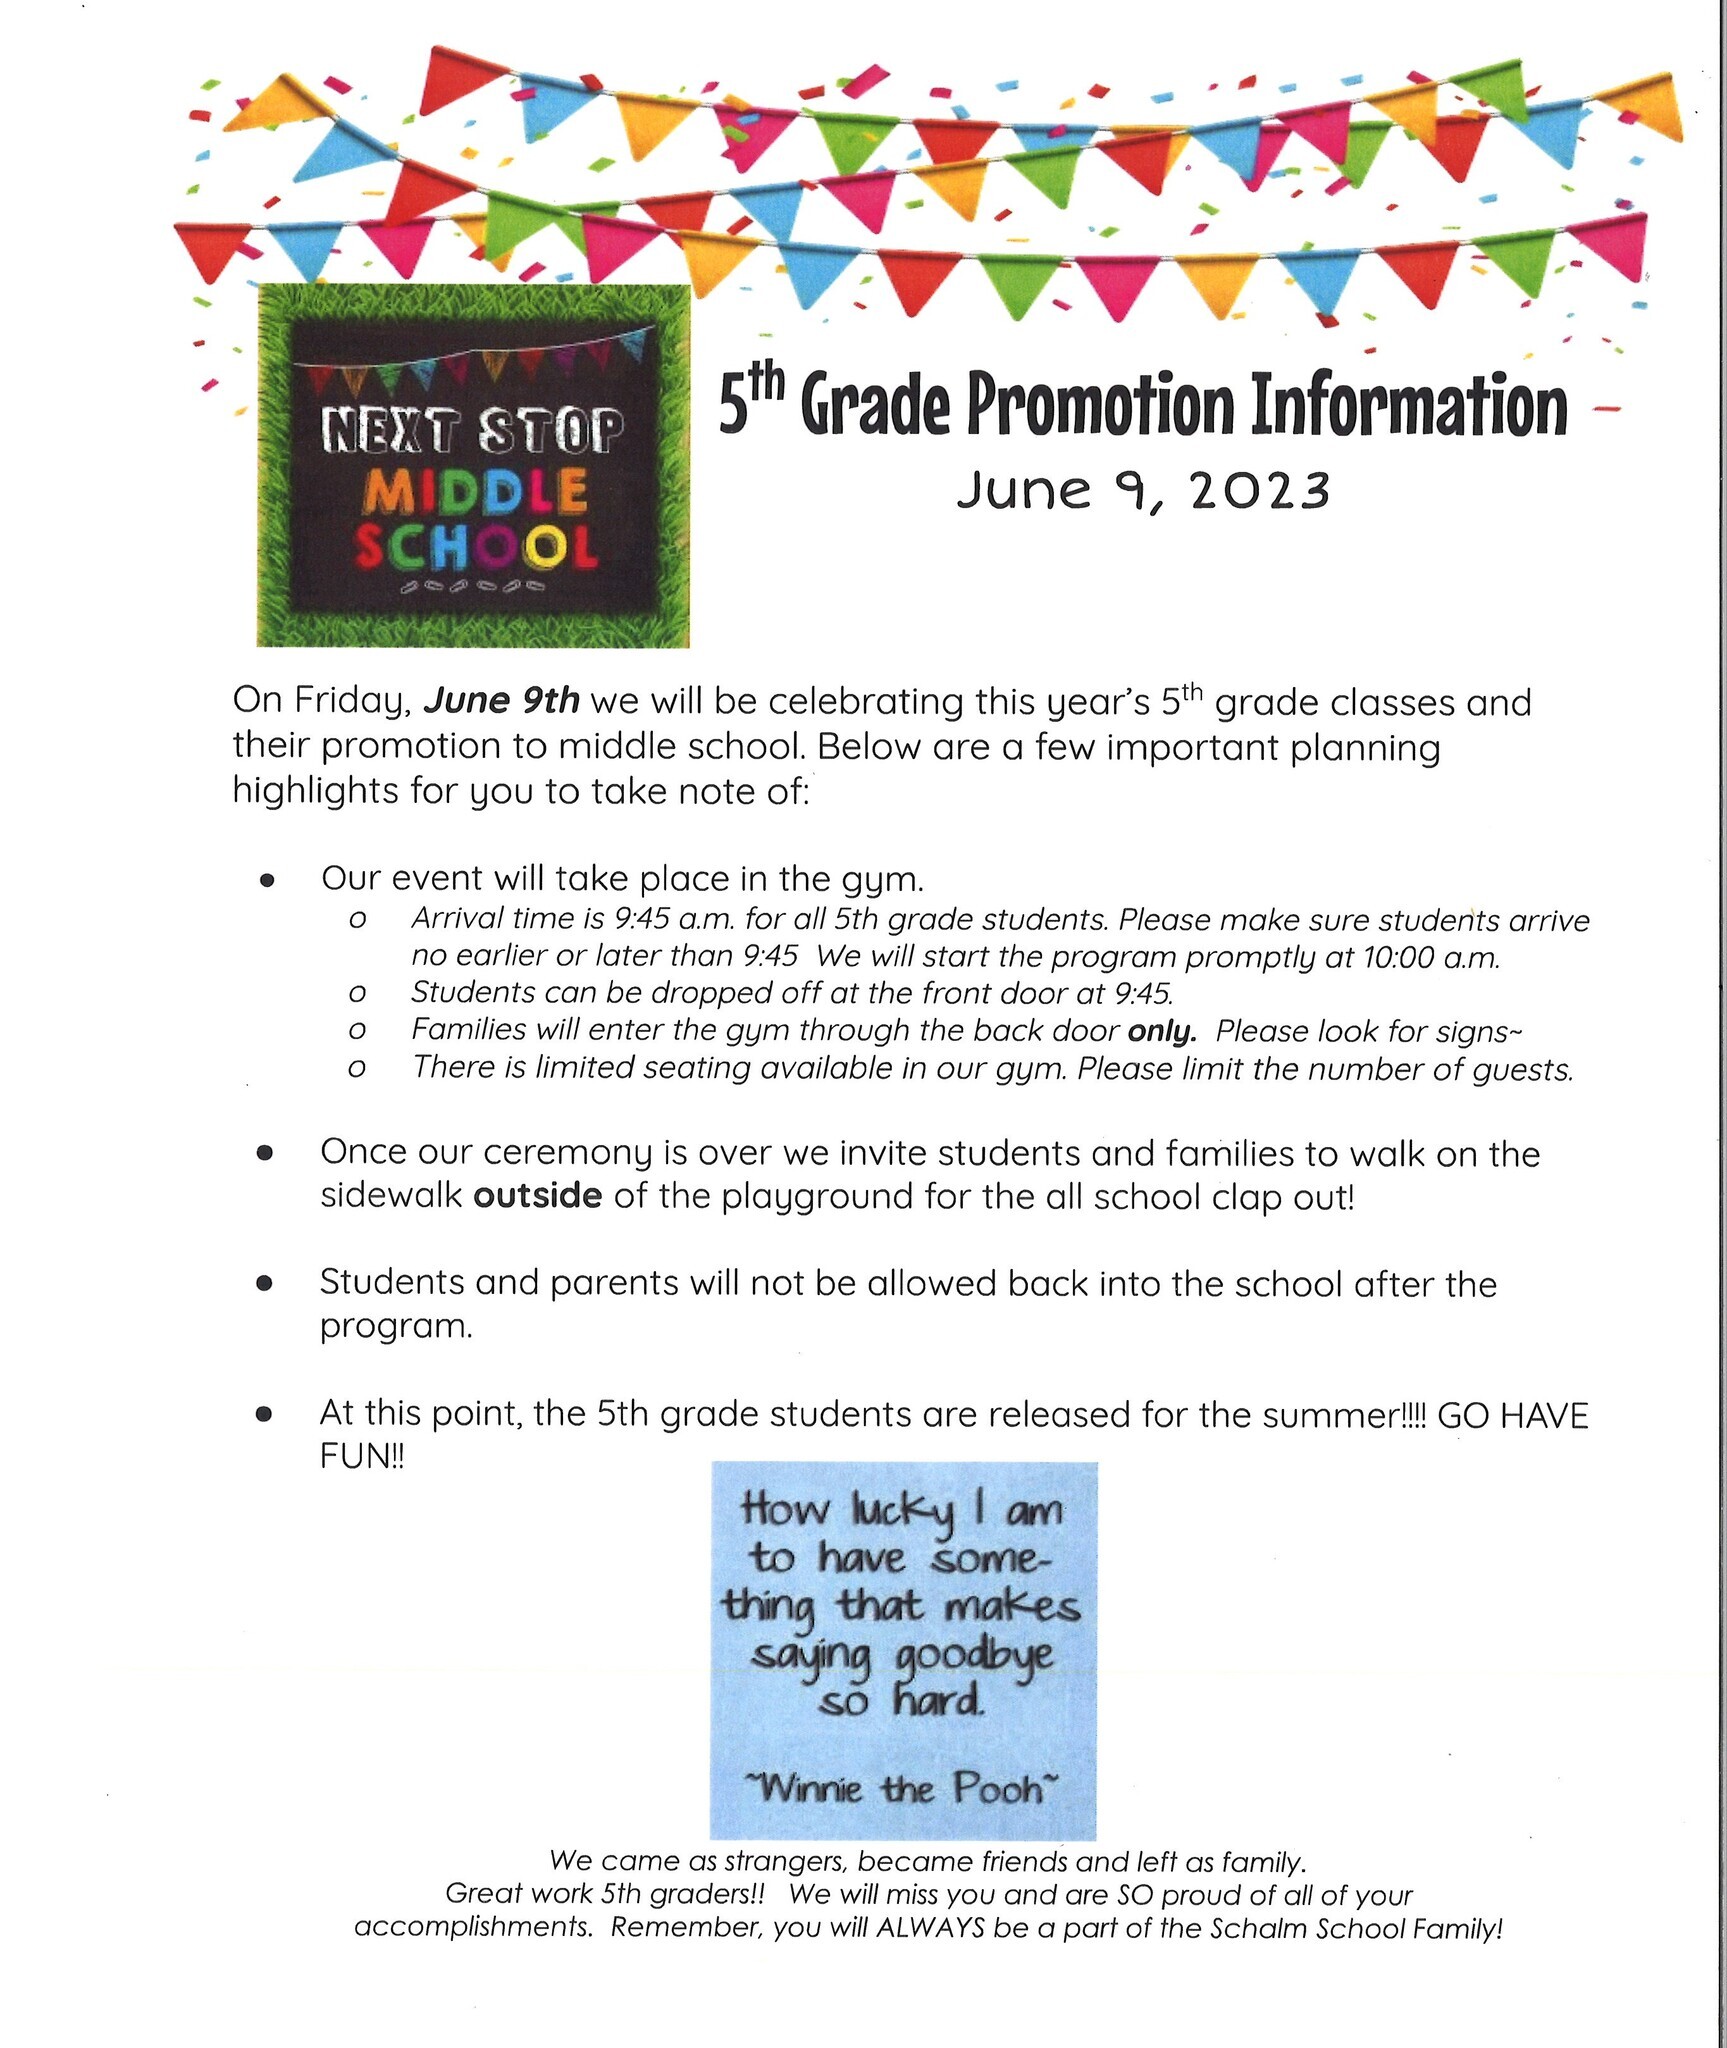 5th Grade Promotion Information on June 9, 2023; On Friday, June 9th we will be celebrating this year's 5th grade classes and their promotion to middle school. Below are a few important planning highlights for you to take note of: Our event will take place in the gym": Arrival time is 9:45 for 5th grade students. Please make sure students arrive no earlier or later than 9:45. We will start promptly at 10:00am.